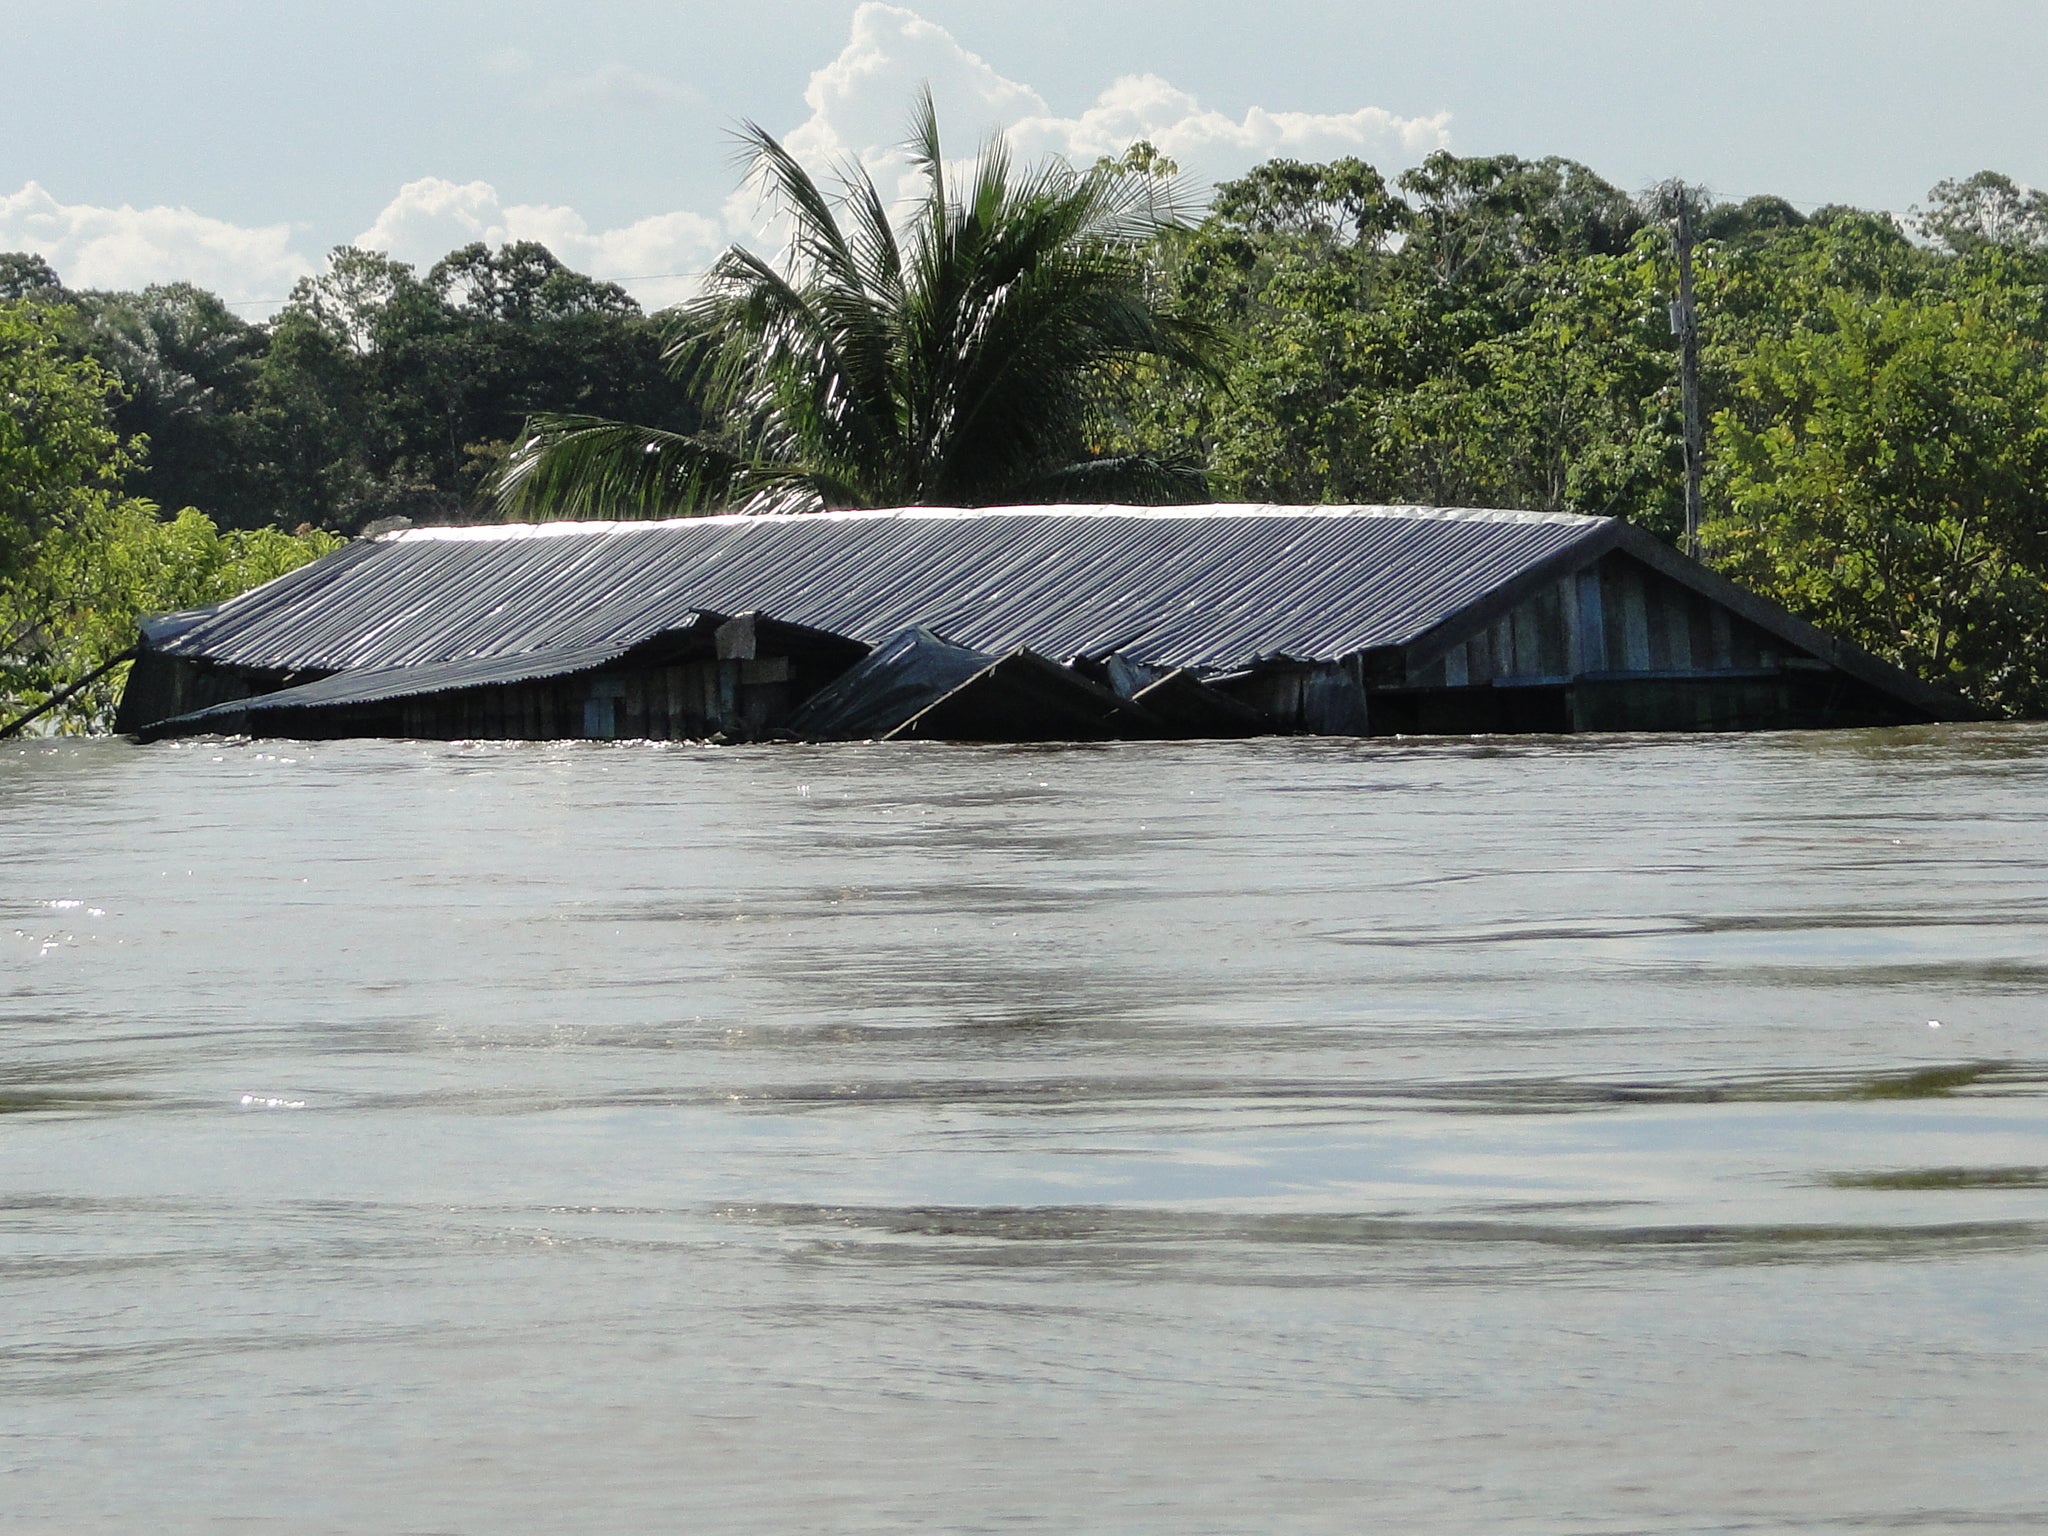 Inundated house along Solimões River (Central Amazonia) during the record-breaking flood in 2012